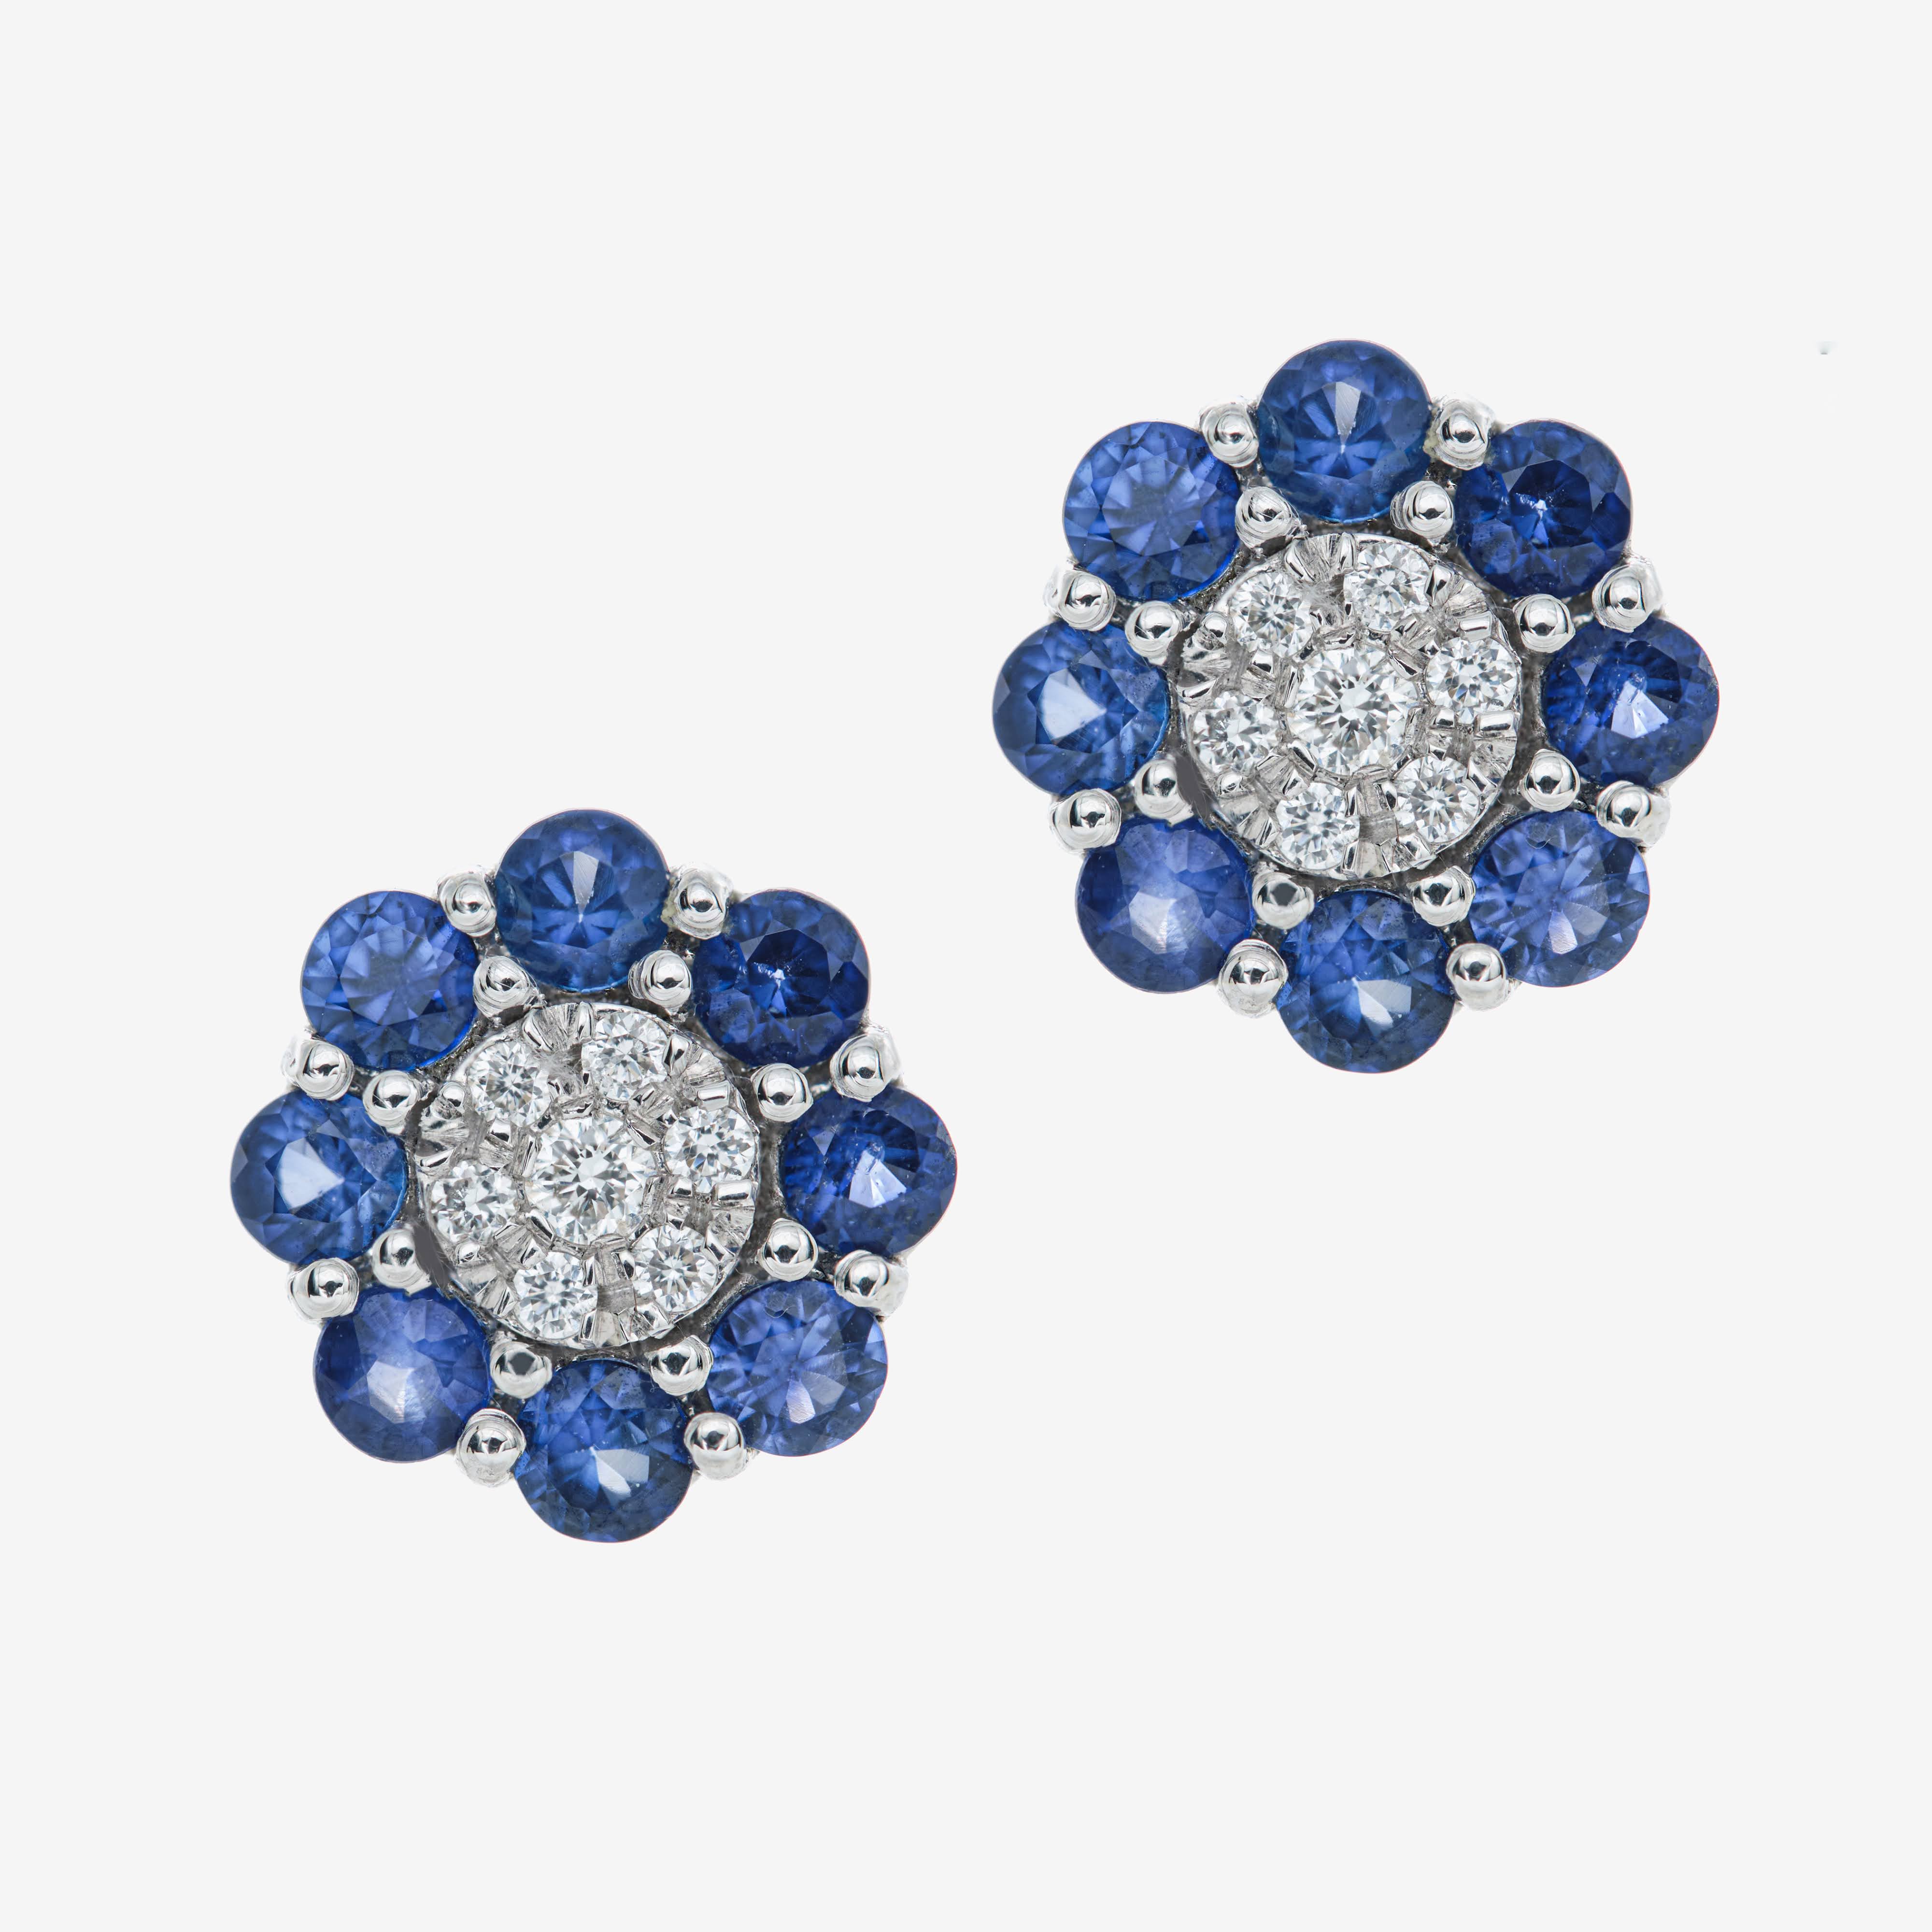 Flower earrings with sapphires and diamonds